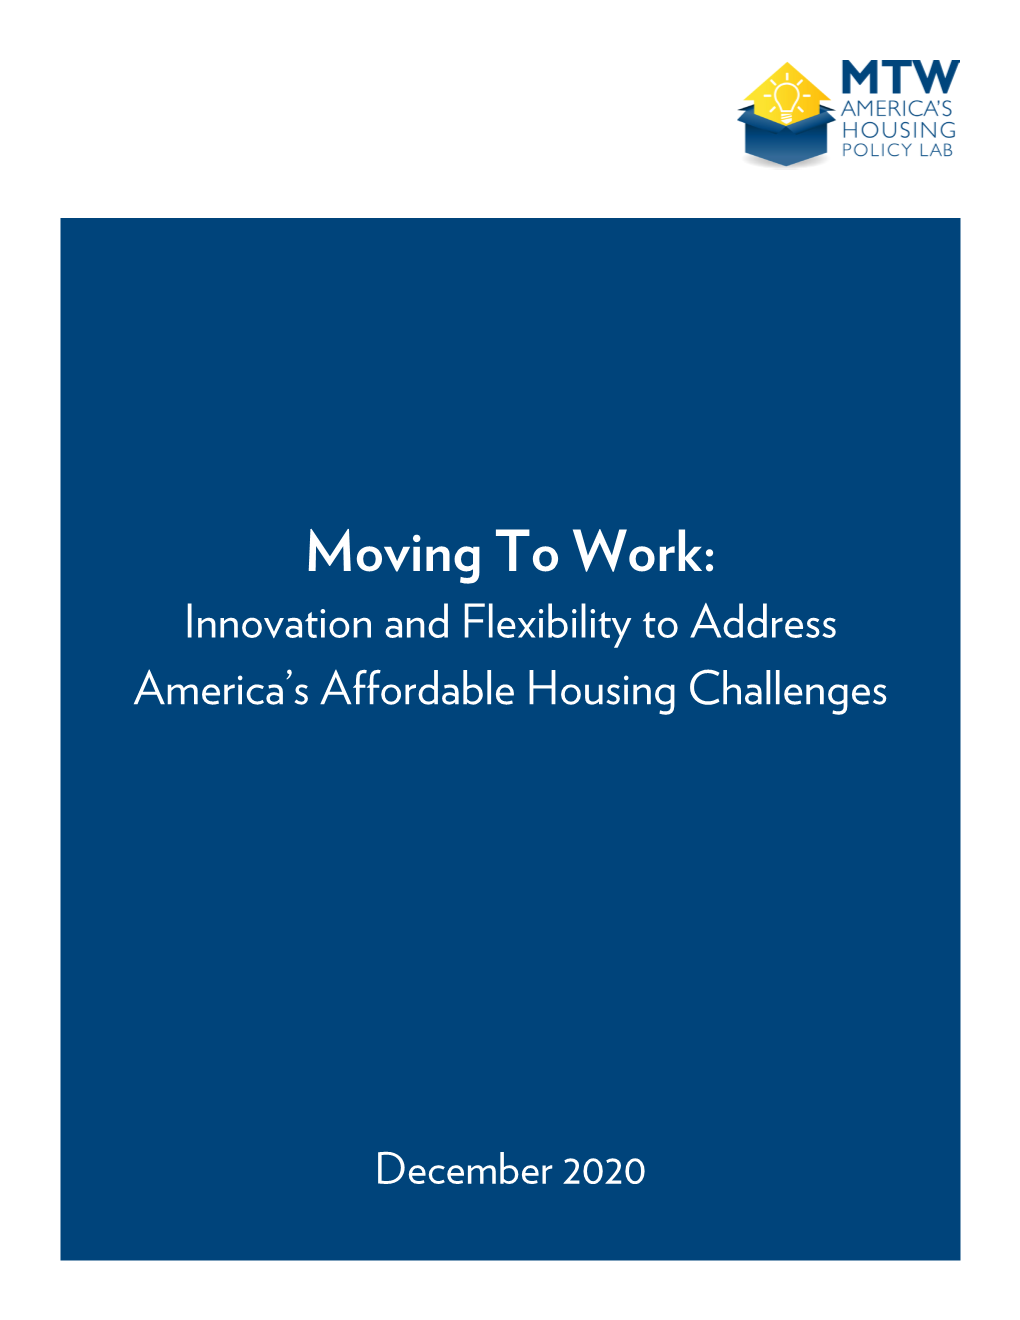 Moving to Work: Innovation and Flexibility to Address America's Affordable Housing Challenges